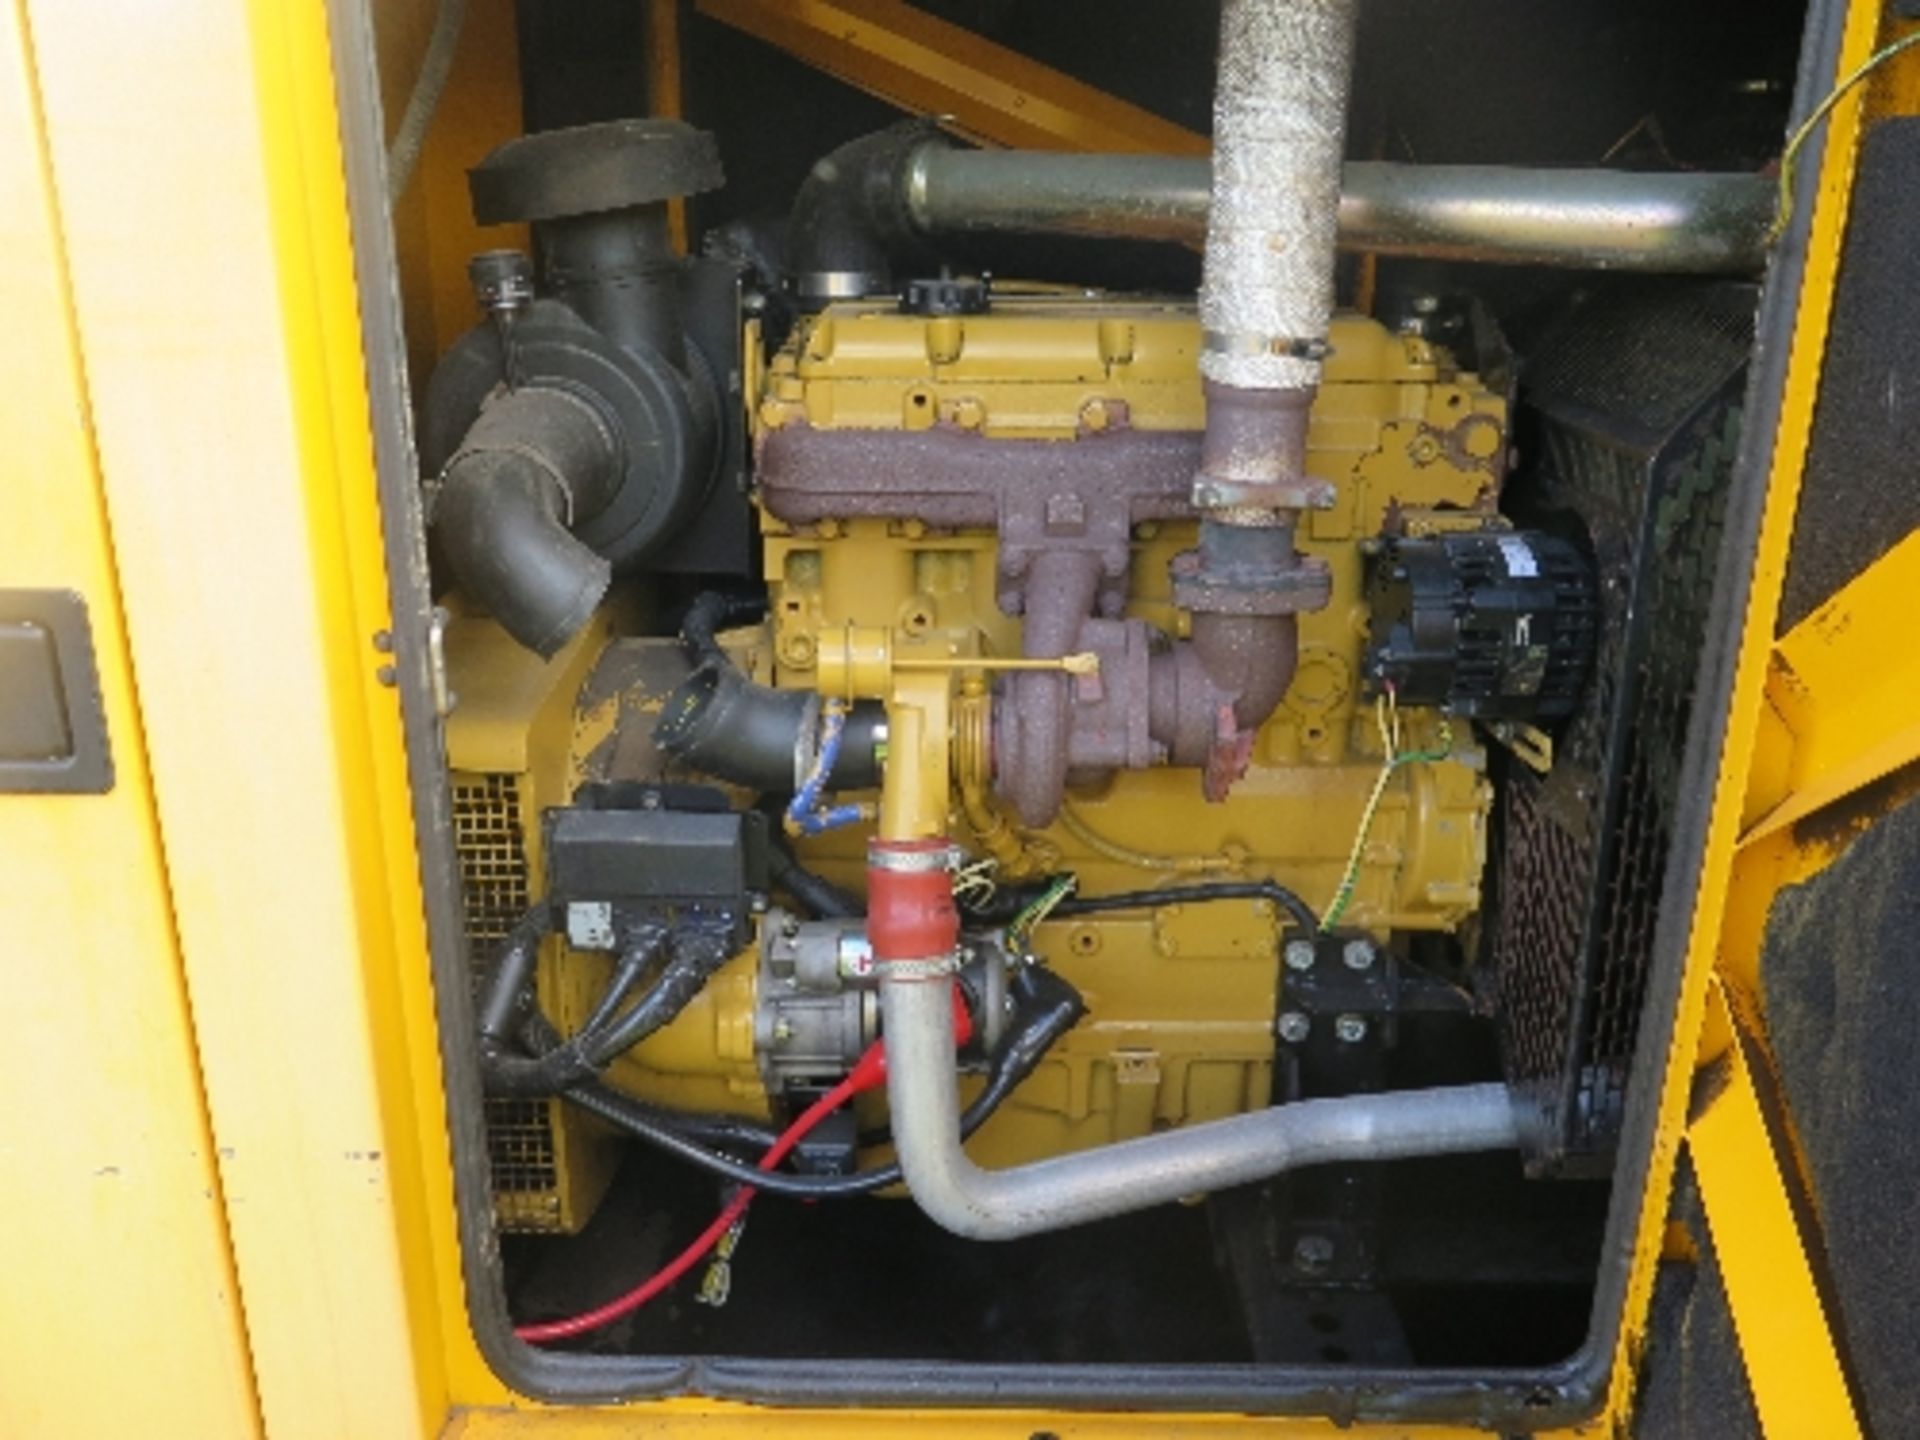 Caterpillar XQE100 generator 17983 hrs 158071
PERKINS - RUNS AND MAKES POWER
ALL LOTS are SOLD - Image 6 of 6